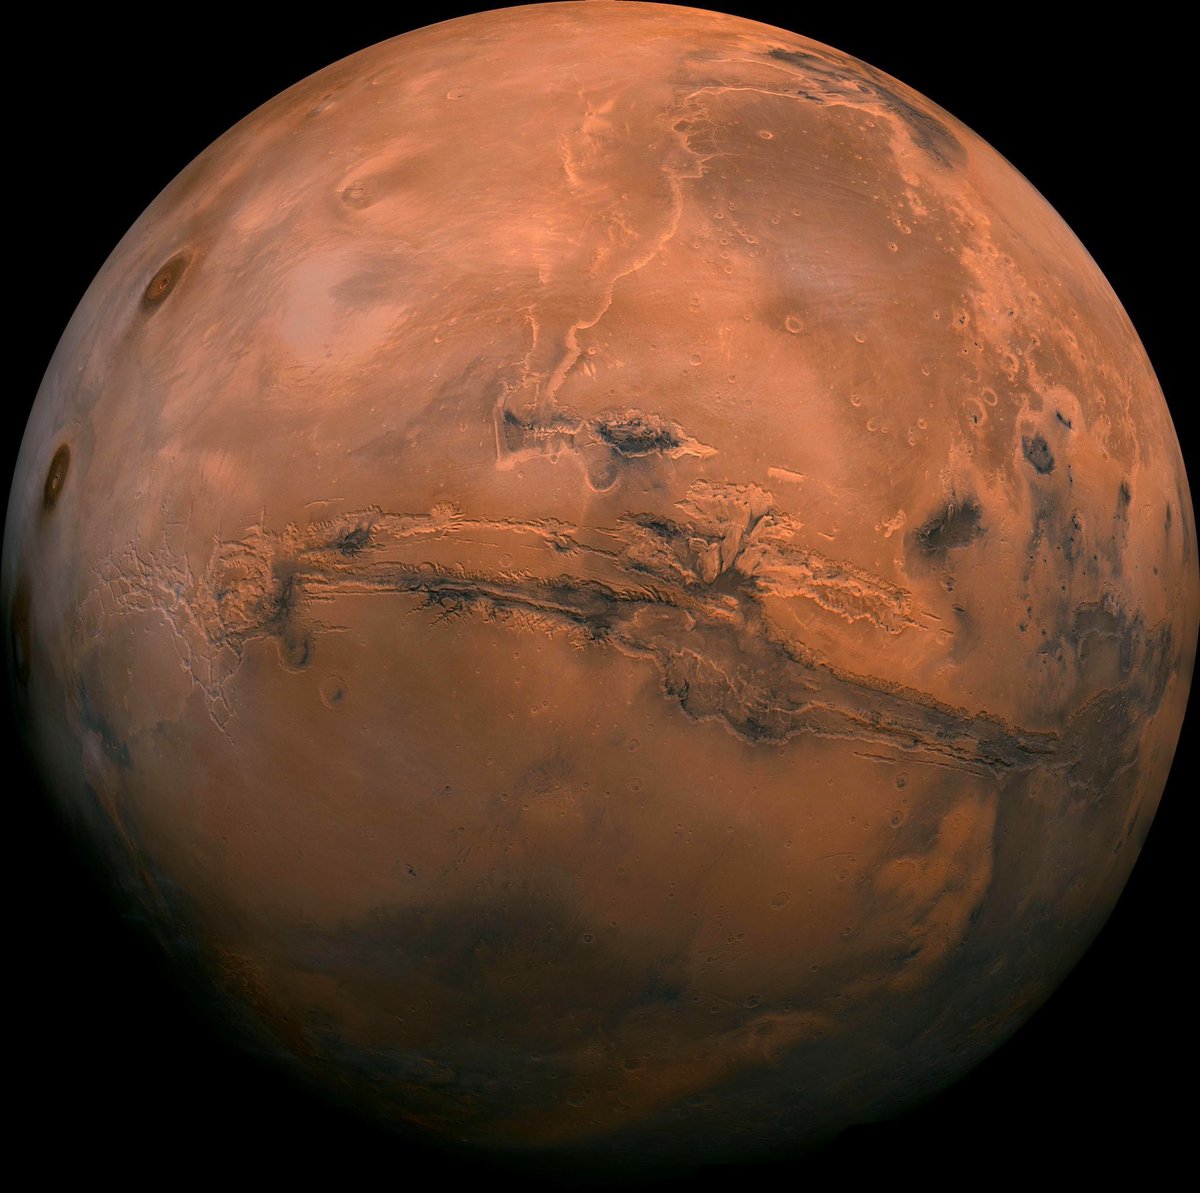 If you could name the first city on Mars, what would you name it?